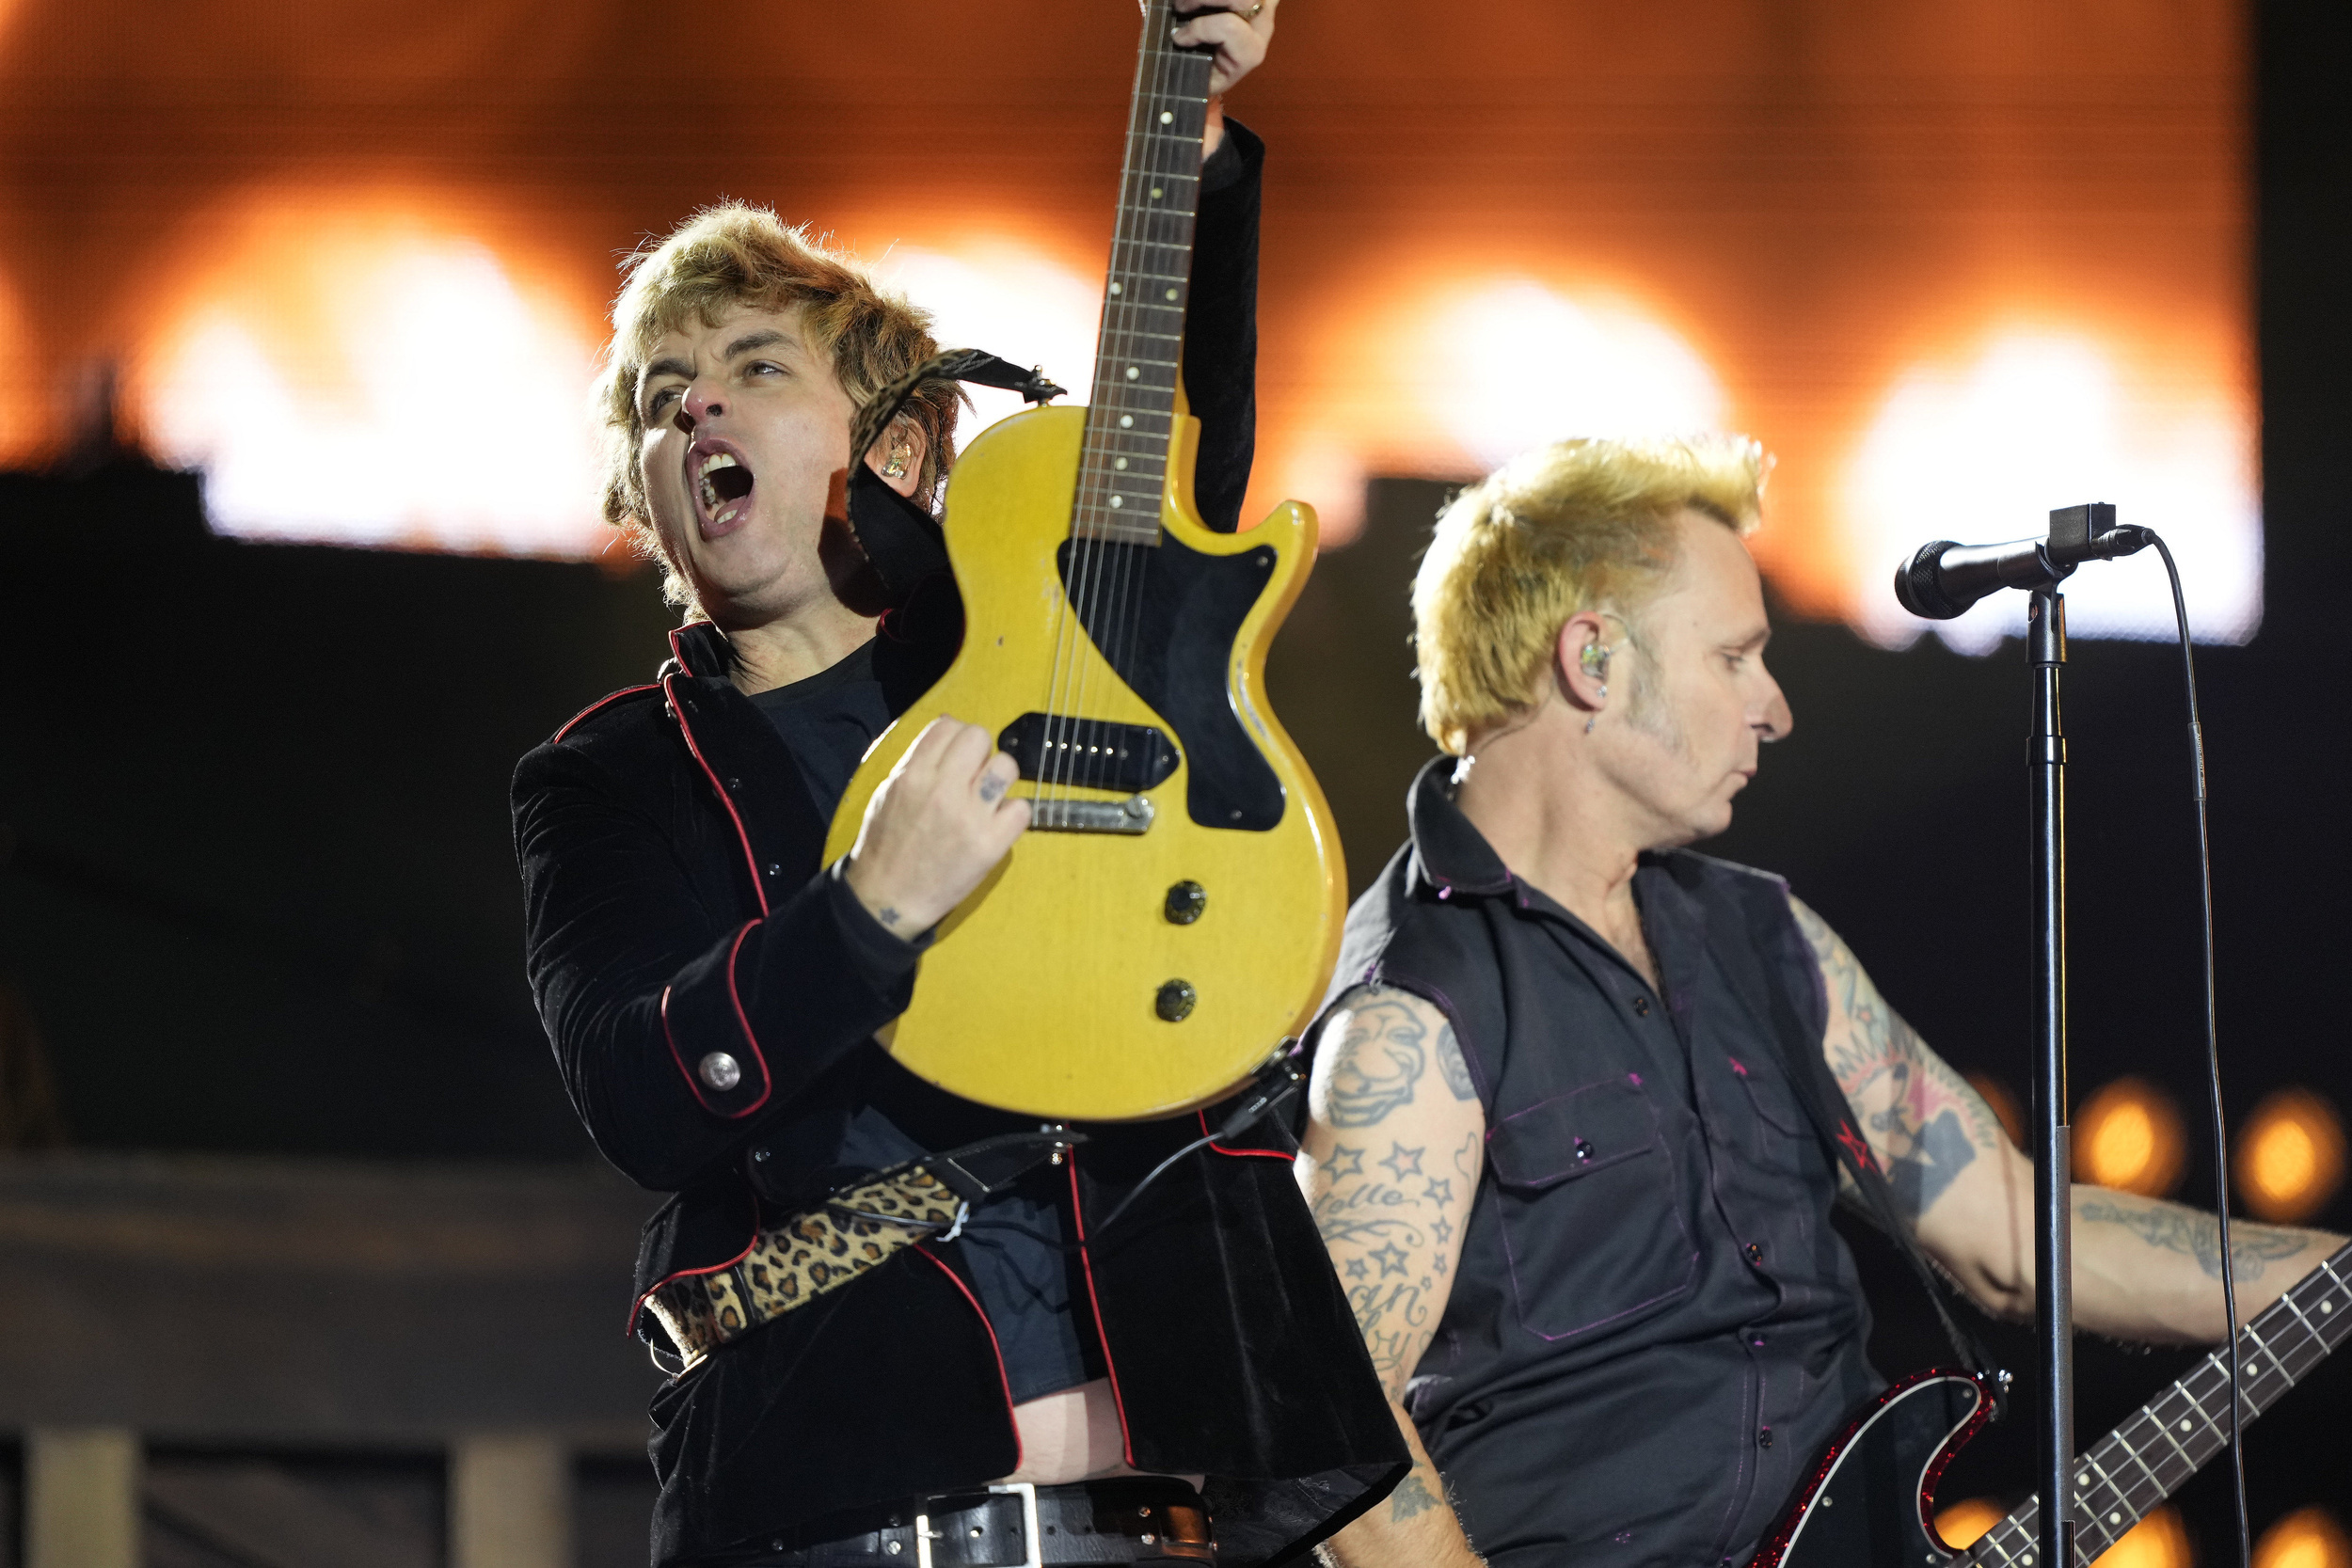 <p>This is going to be a massive year for Green Day, and The Saviors Tour should be one big party. In addition to supporting the band's 14th studio release, <em>Saviors </em>(officially dropped on Jan. 19), which includes already popular singles "The American Dream Is Killing Me" and "<a href="https://www.youtube.com/watch?v=jH3wmjaoADY">Look Ma, No Brains!</a>," the band is celebrating the 20th anniversary release of <em>American Idiot</em> and 30 years of <em>Dookie</em>. The tour kicks off in Europe in late May 30, then opens in North America in late July and concludes in San Diego on Sept. 29. The Hives are among the opening acts in Europe, with Smashing Pumpkins, Rancid and The Linda Lindas supporting in the U.S. and Canada.</p><p>You may also like: <a href='https://www.yardbarker.com/entertainment/articles/20_actors_who_need_to_join_the_snl_five_timers_club_022724/s1__39987816'>20 actors who need to join the 'SNL' Five-Timers Club</a></p>